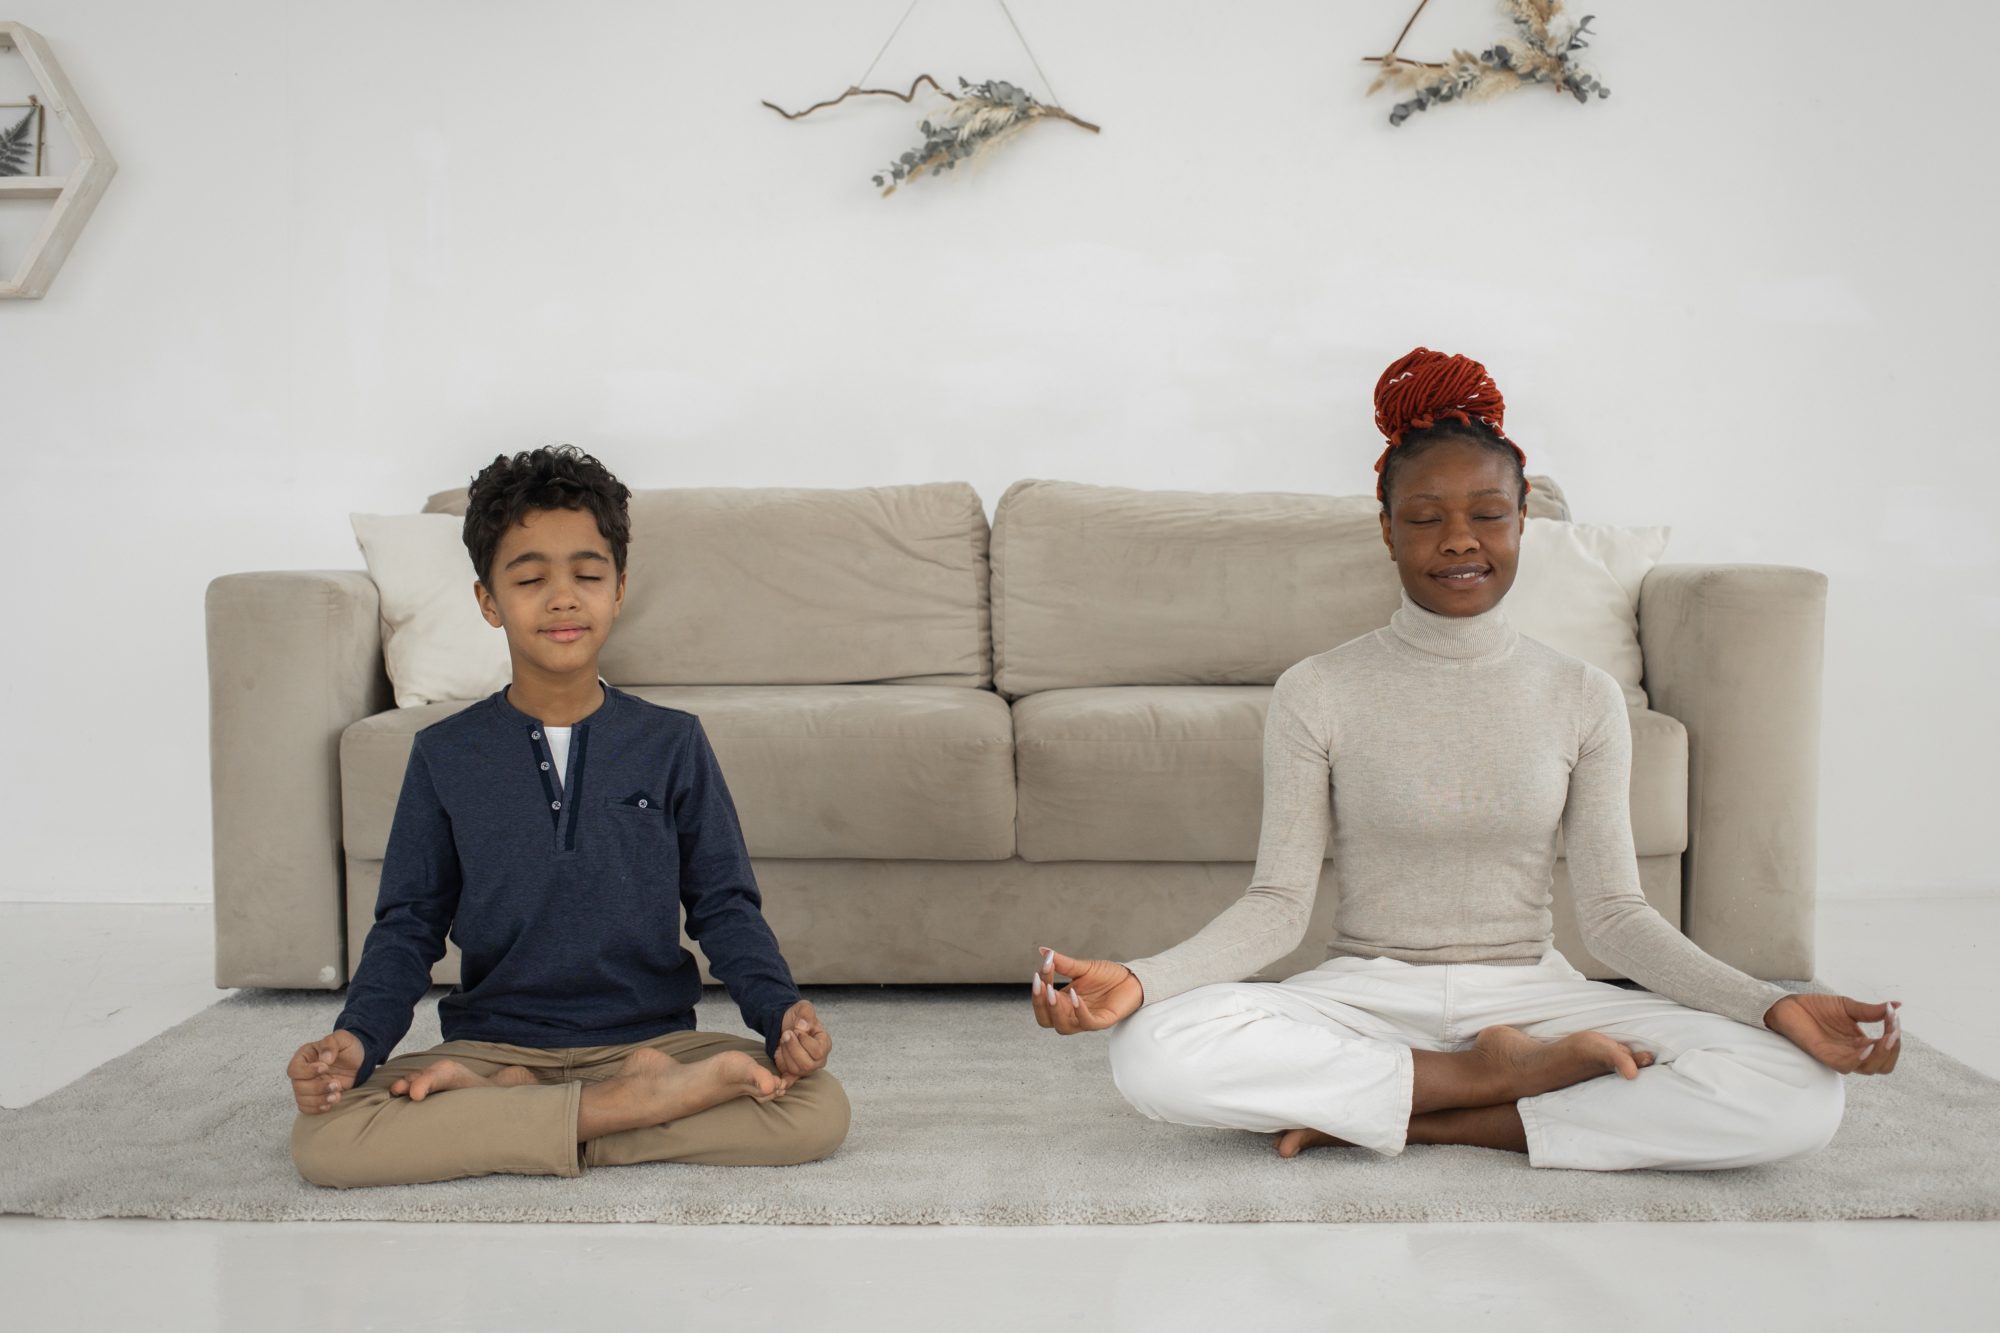 Boy and woman meditating in front of a sofa